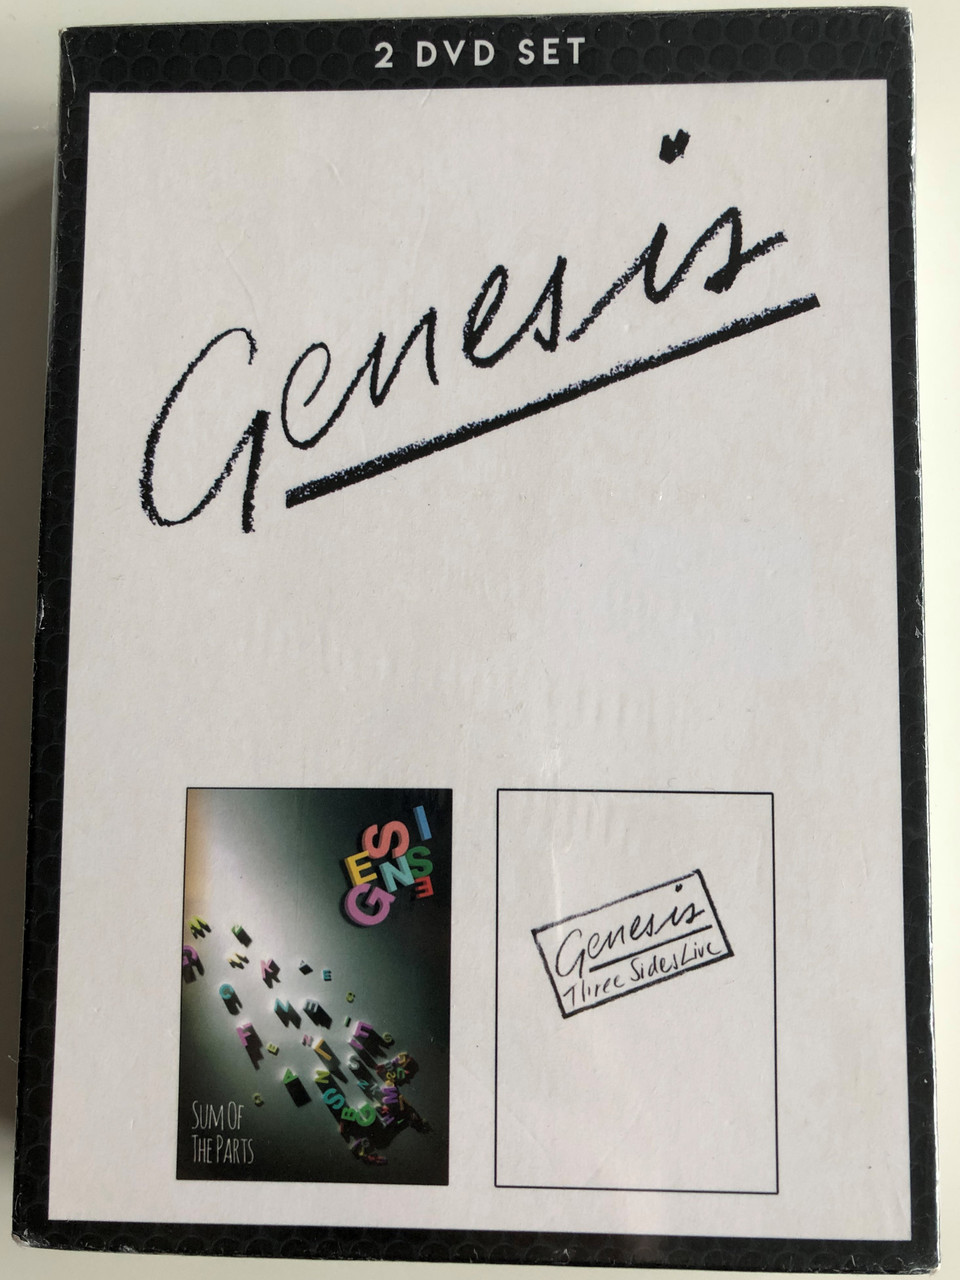 Genesis 2xDVD SET 2014 Three Sides Live - Sum of the parts / Documentary  chronicling the career of British rock band Genesis / Eagle Vision /  EREDV1336 - bibleinmylanguage